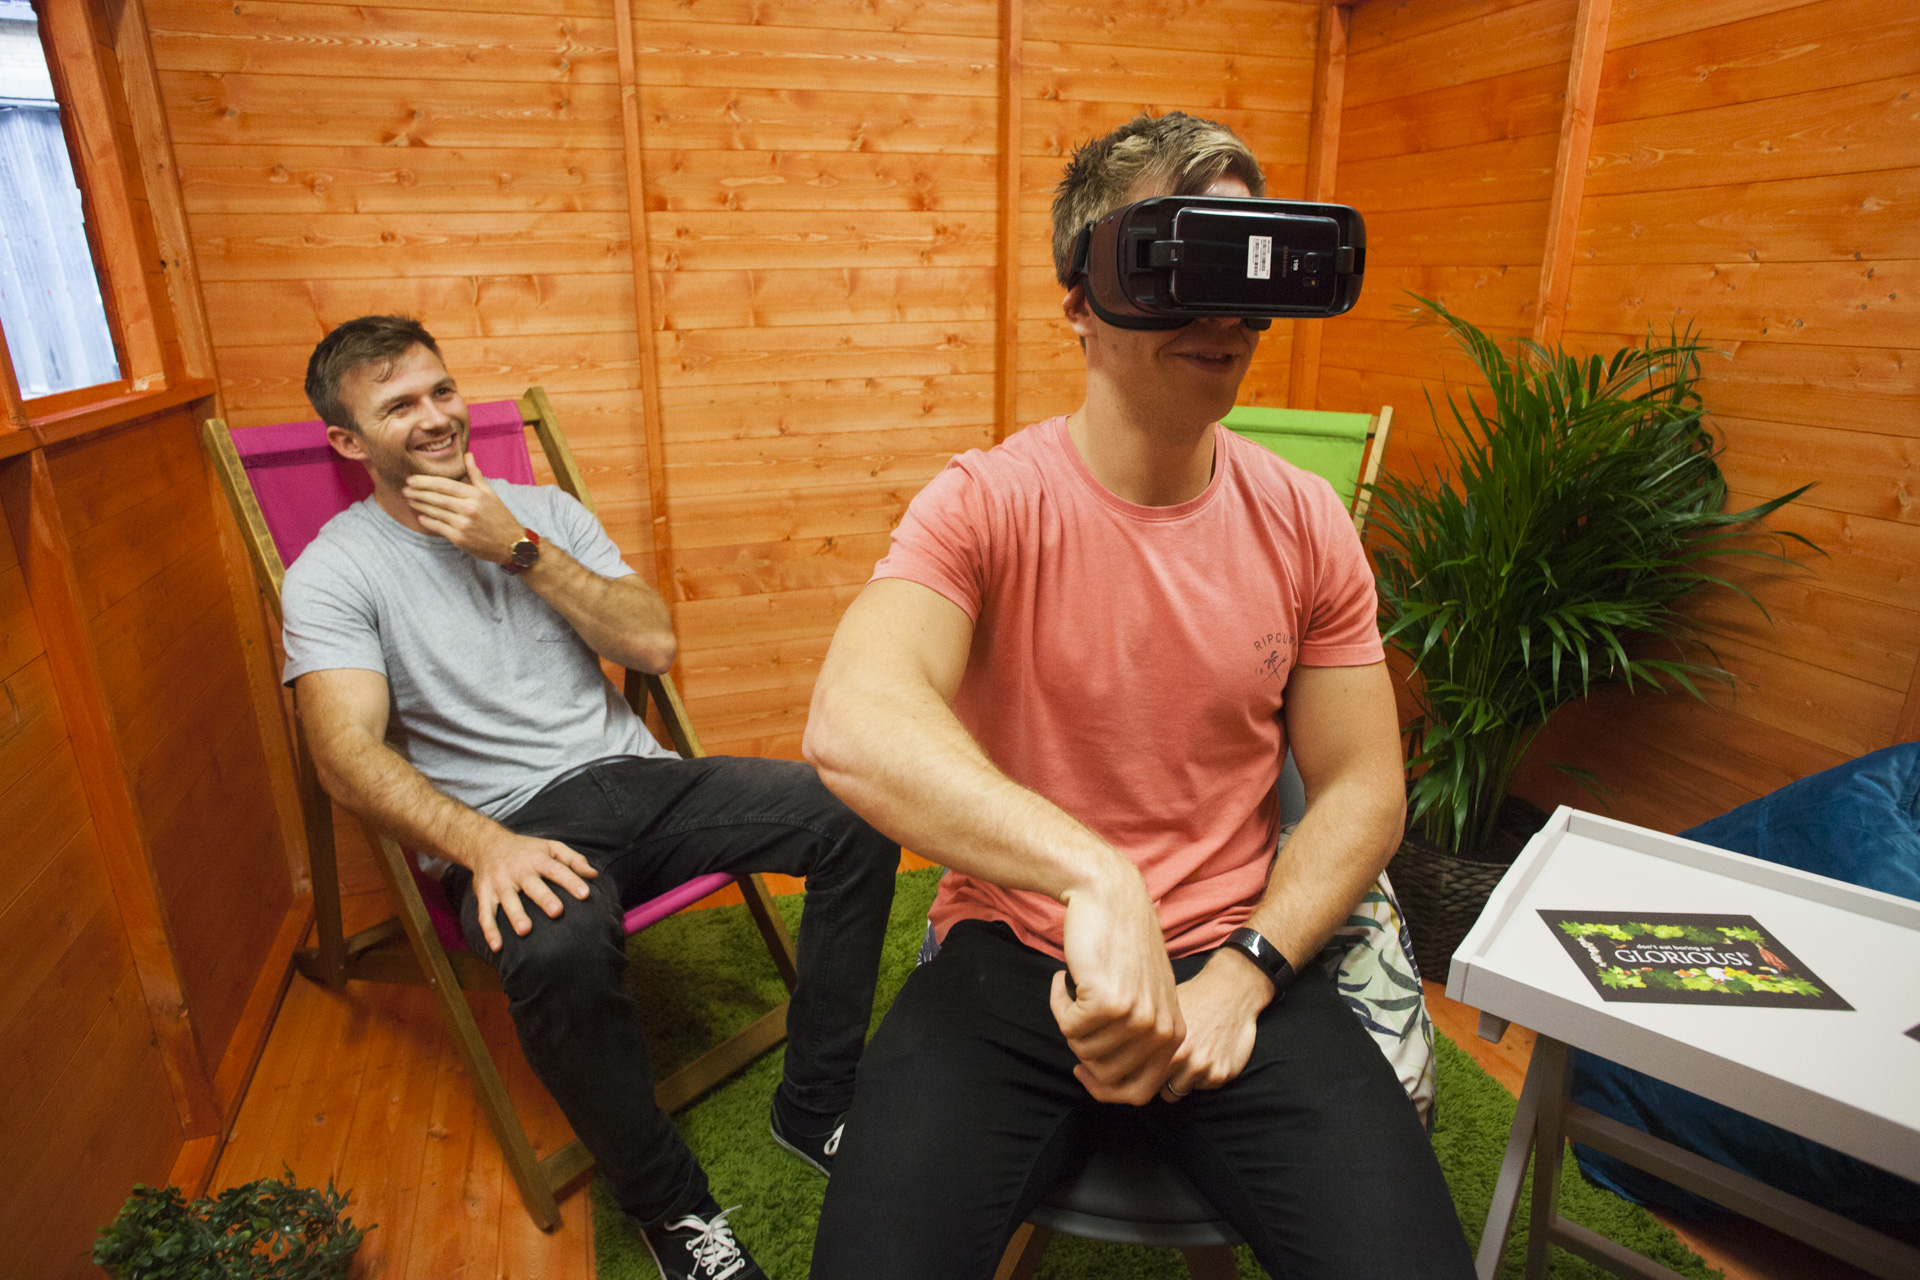 Mindful Chef boys try out GLORIOUS! Soups VR mindfulness experience in the world’s first wellness shed 2 – high res